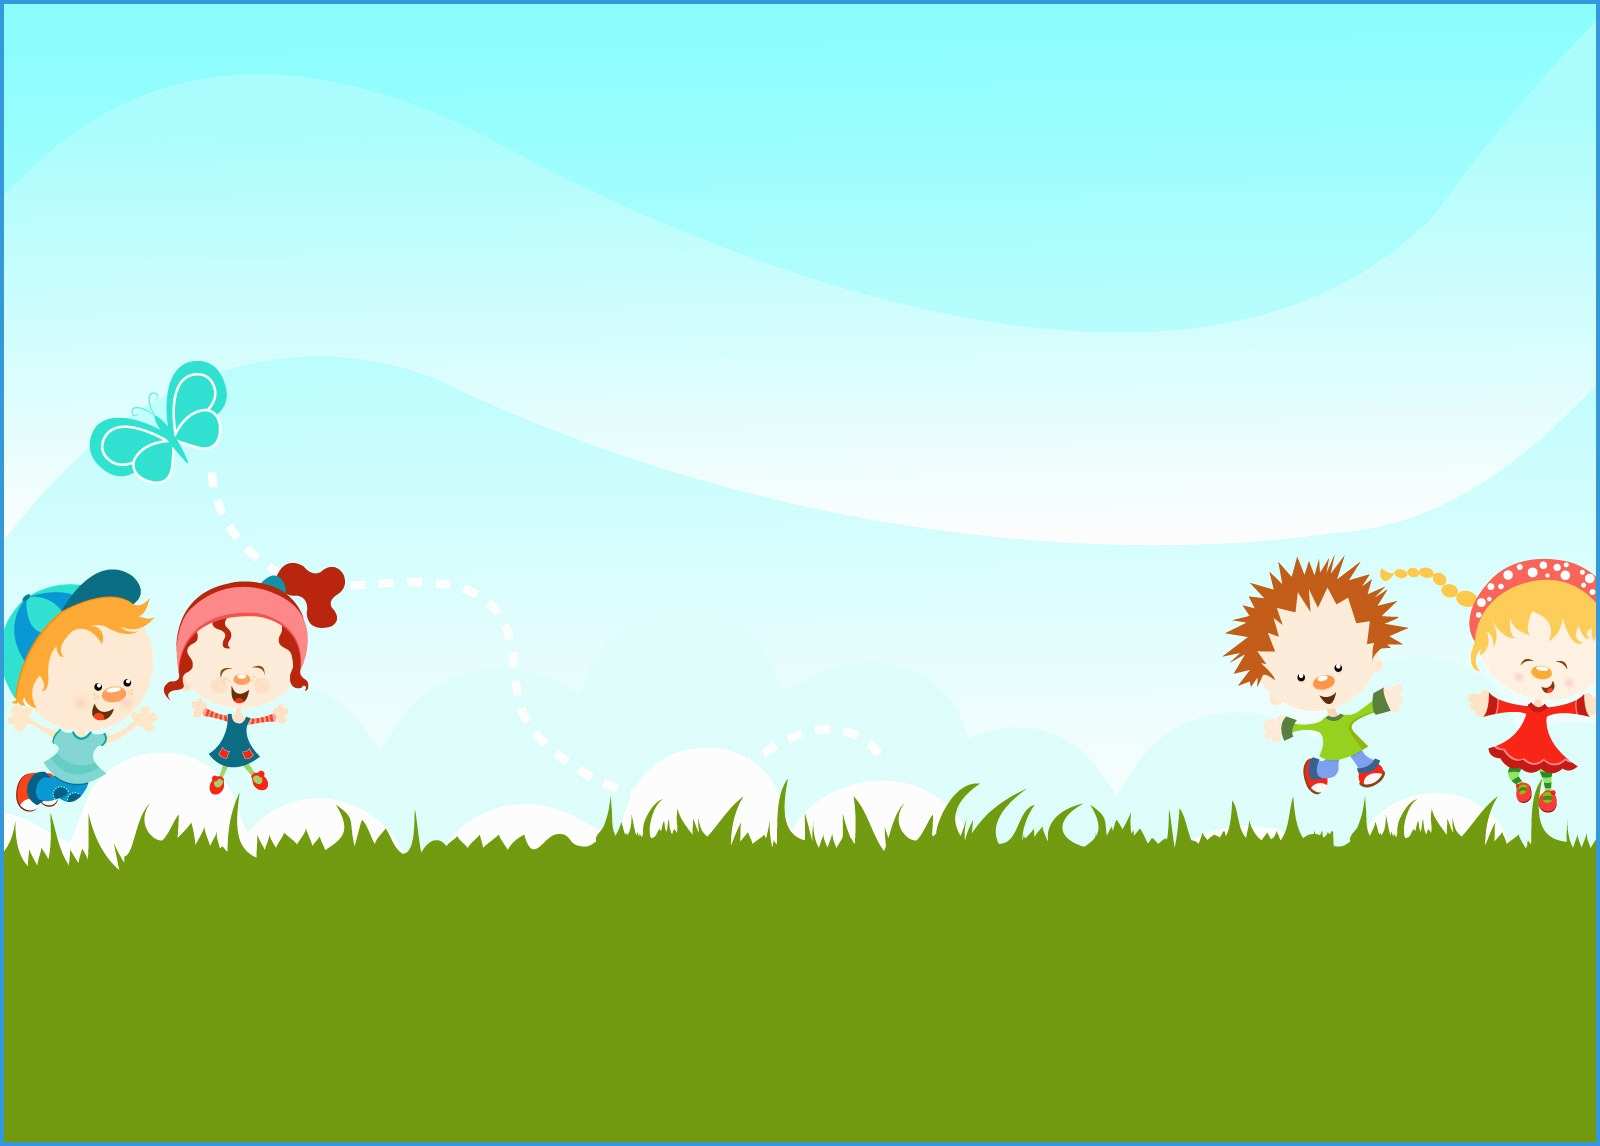 Download Free Child Care Powerpoint Templates Lovely Children Preschool Kids Background On Itl cat